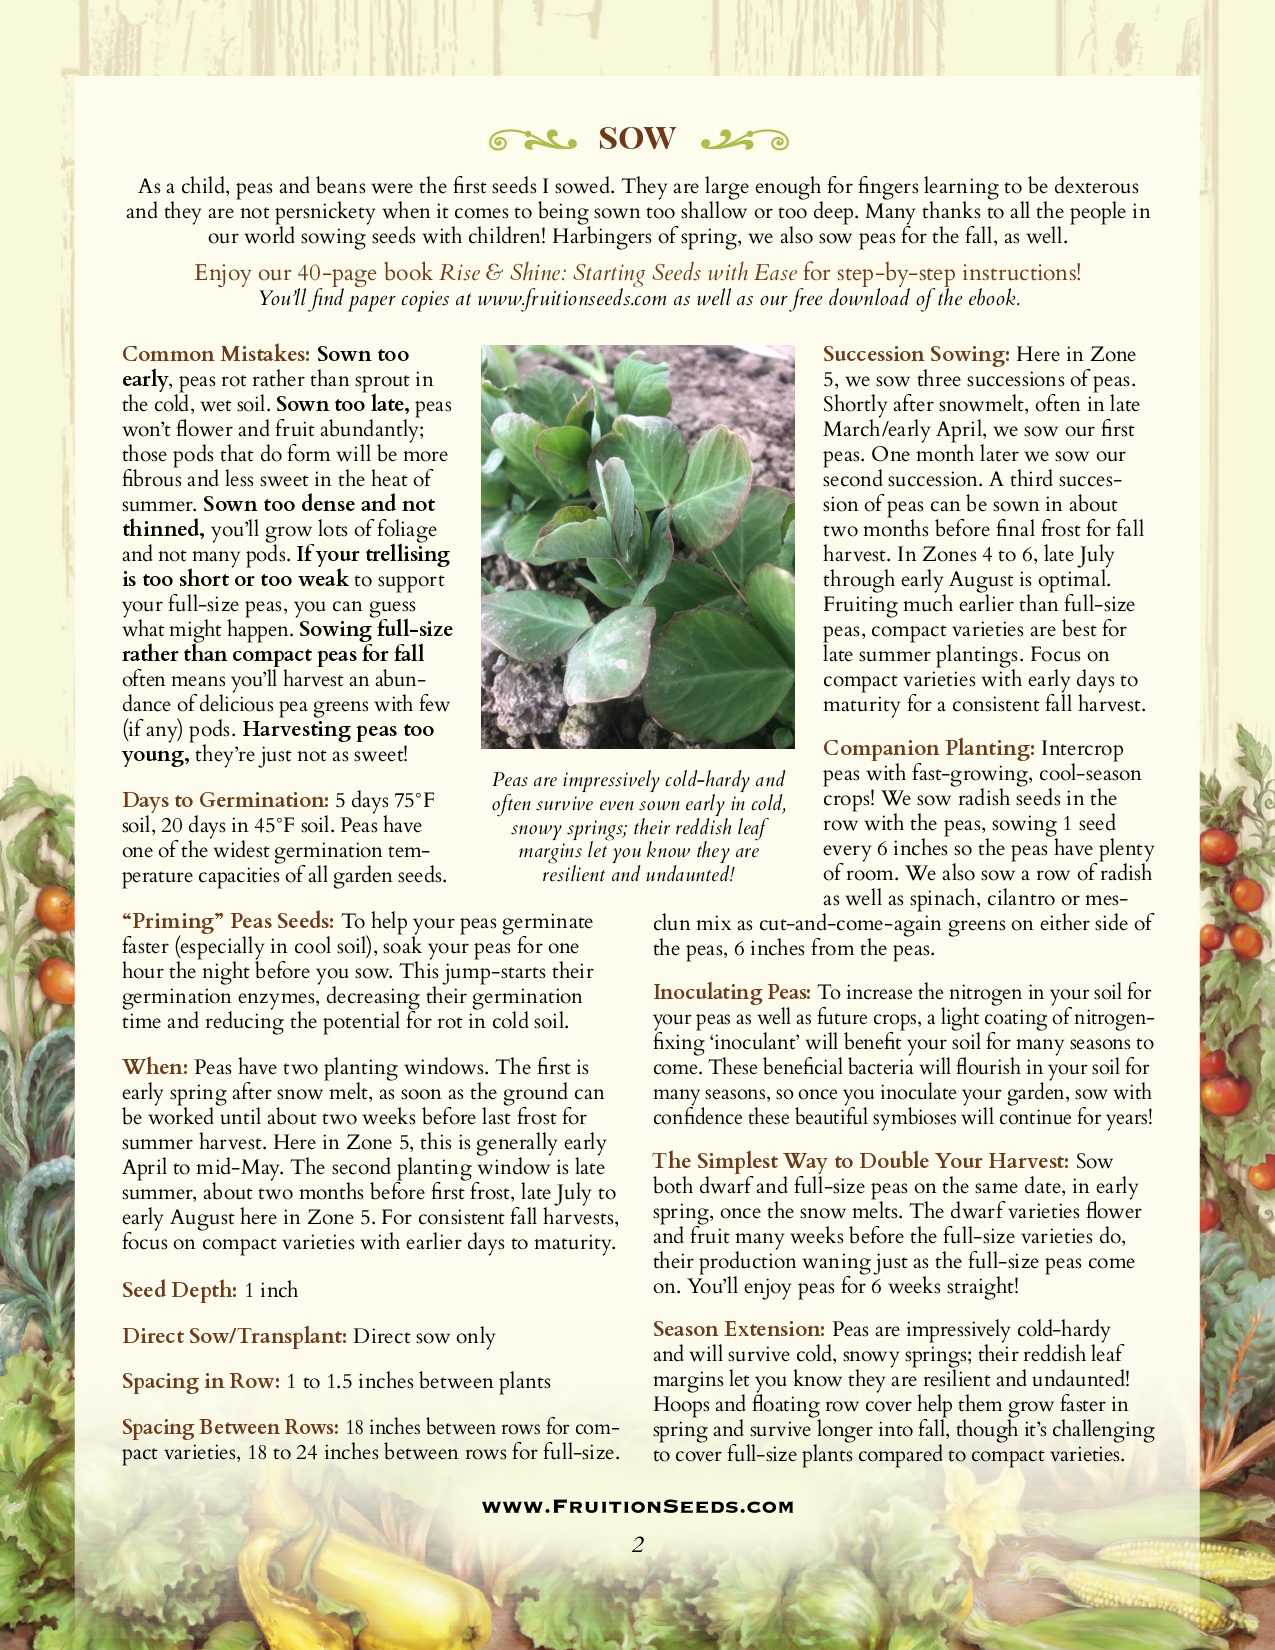 Growing Guide for Peas Growing Guide